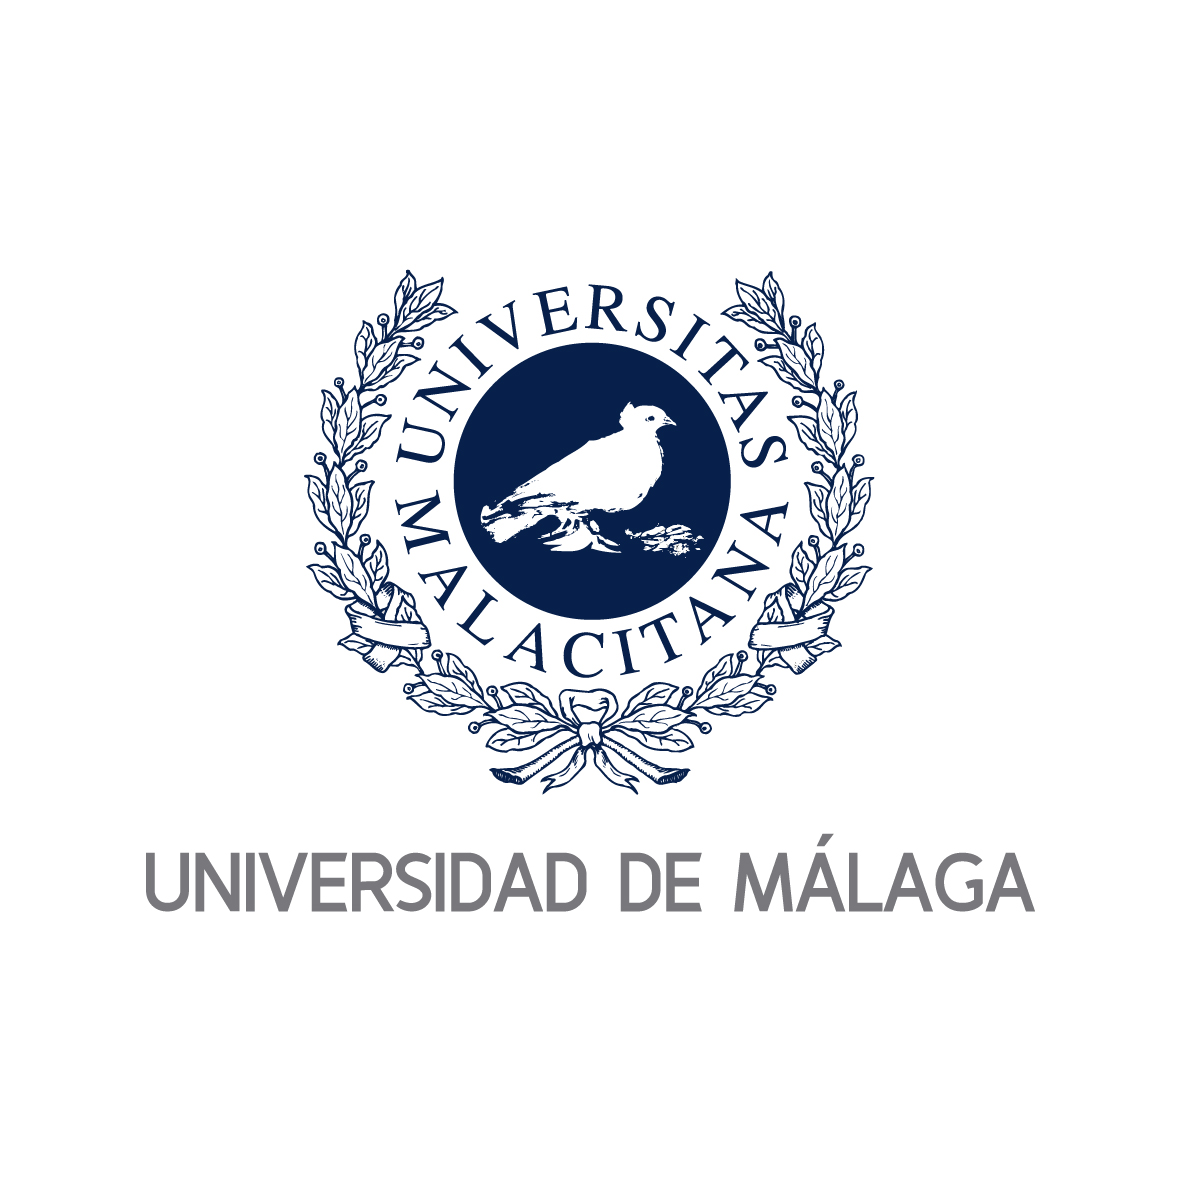 University of Malaga chooses ASIM paper for first prize in Research Excellence